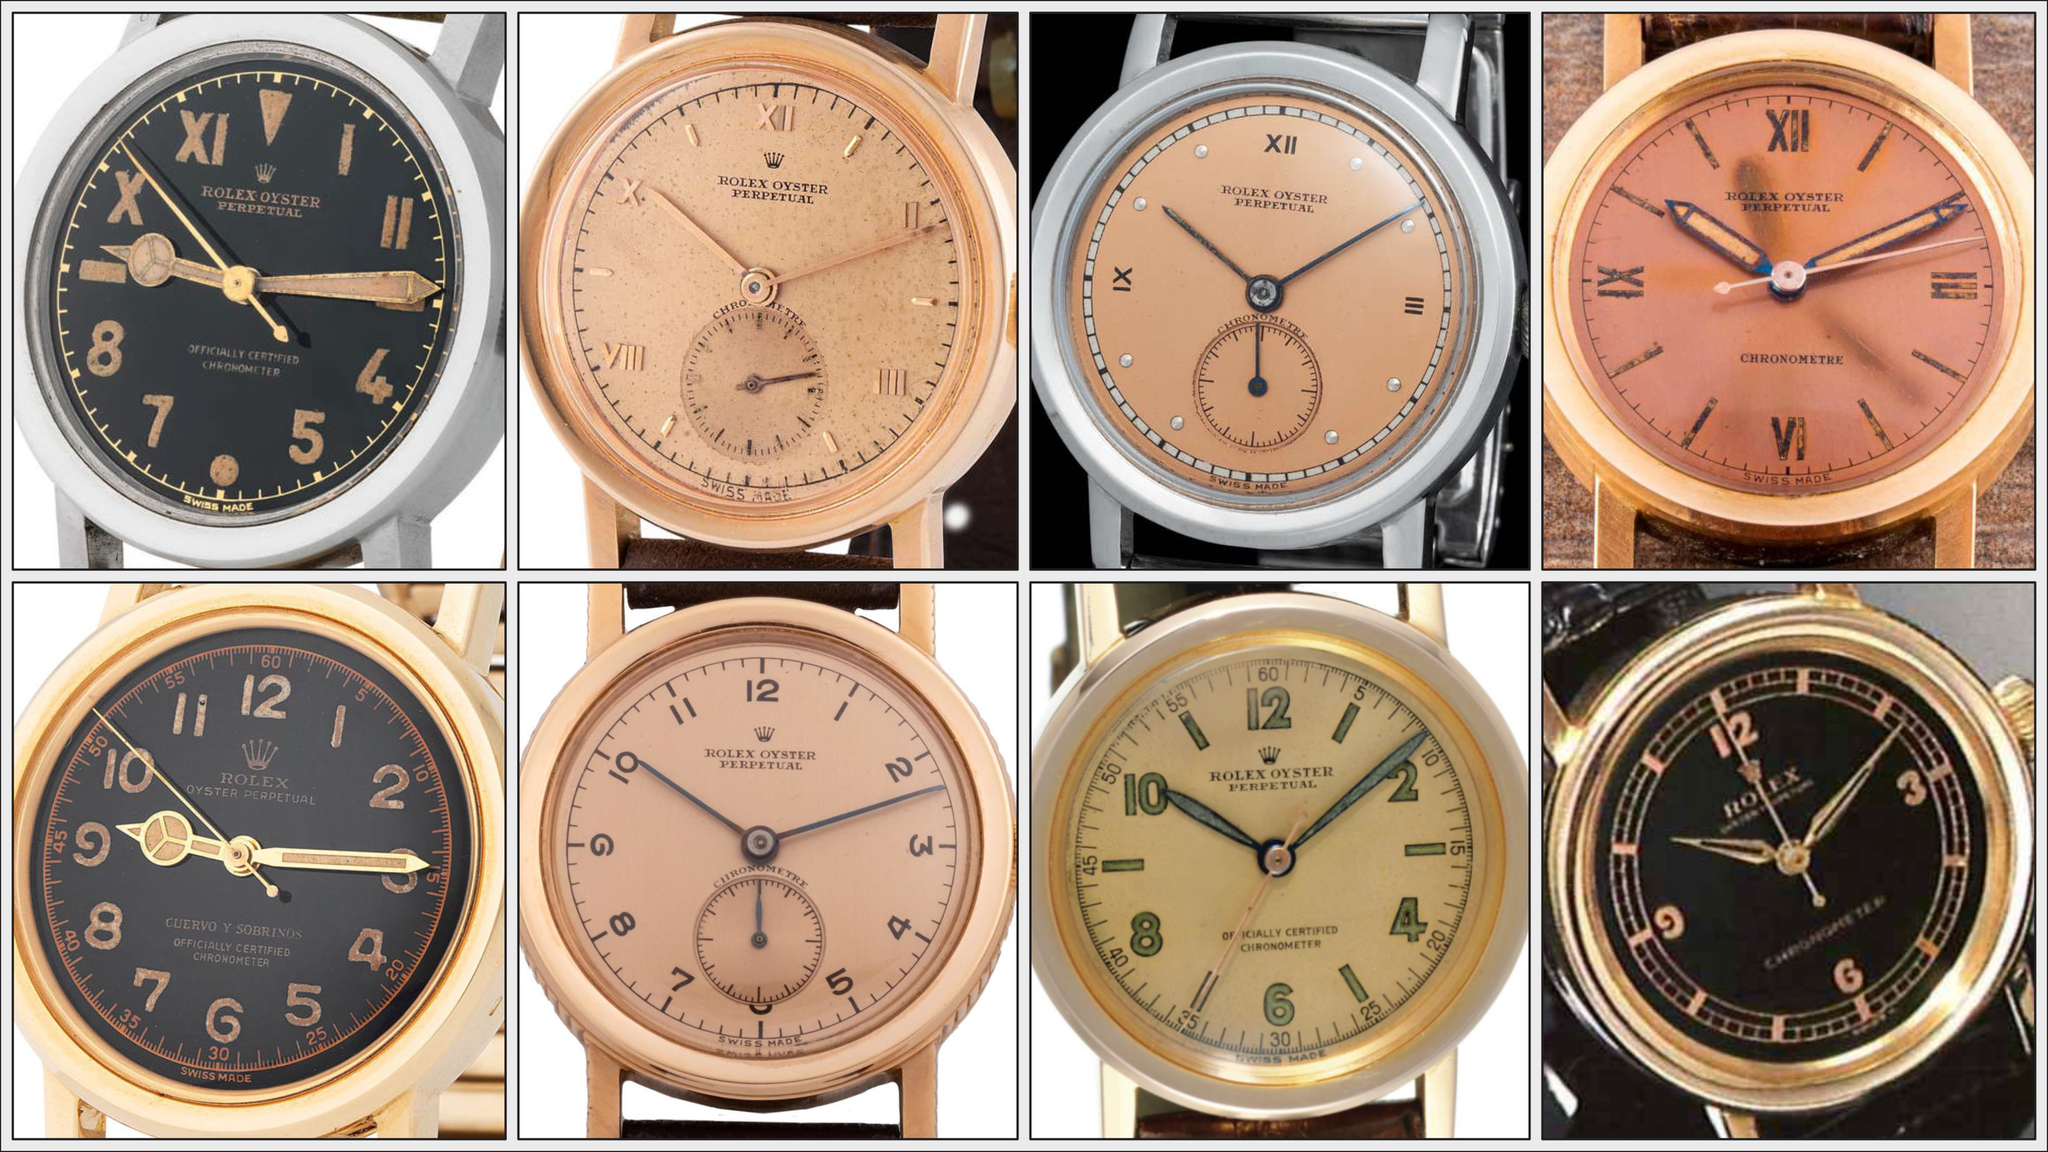 Various different dial executions for the Rolex "Empire" models